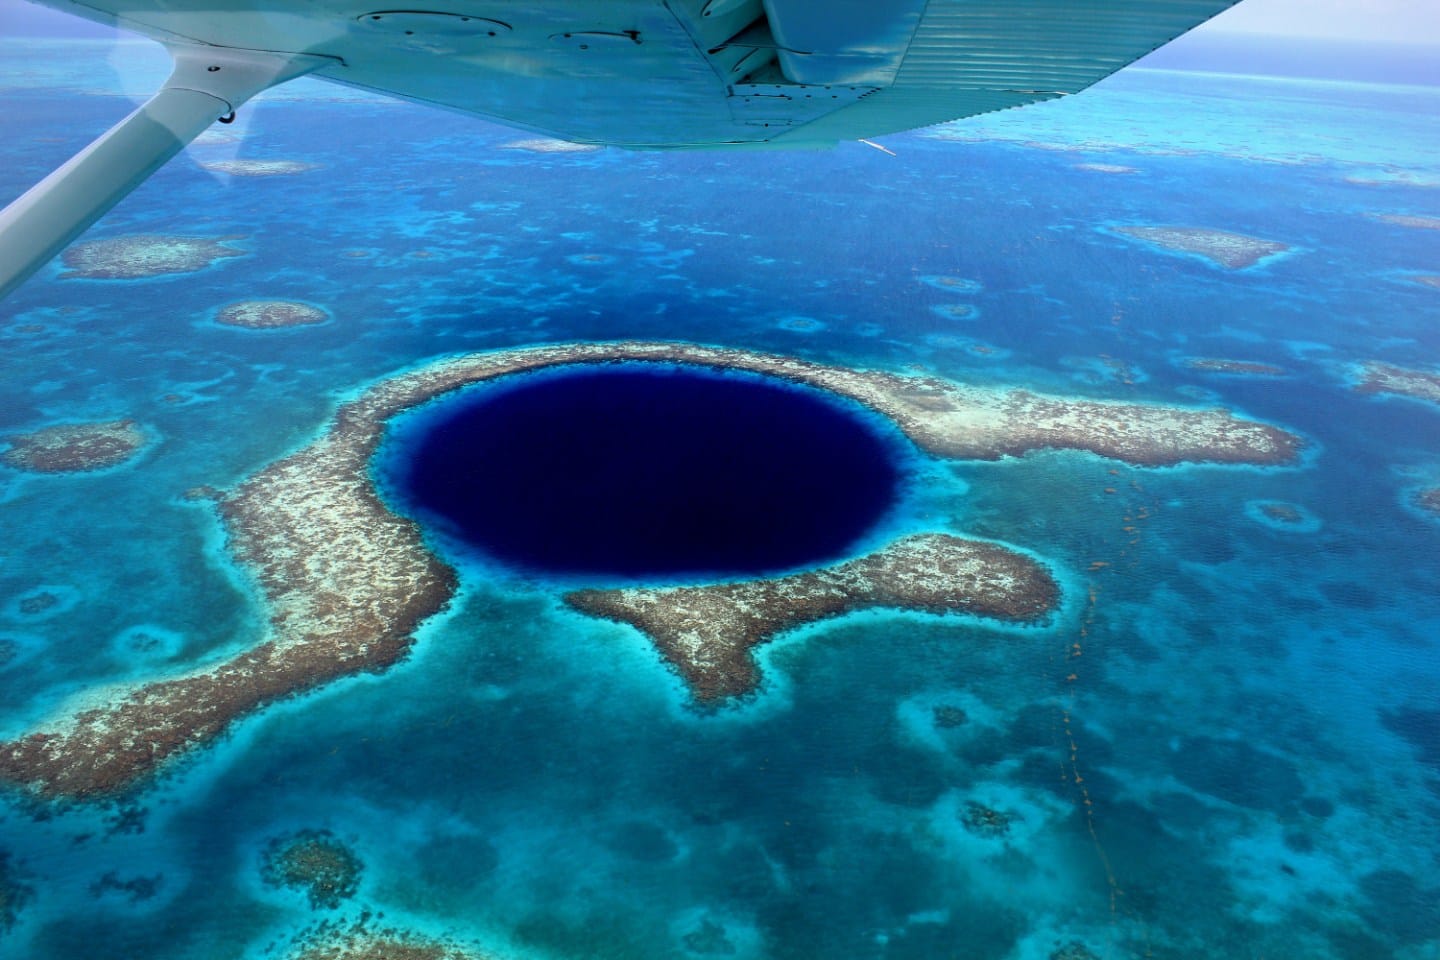 Flying over the Blue Hole